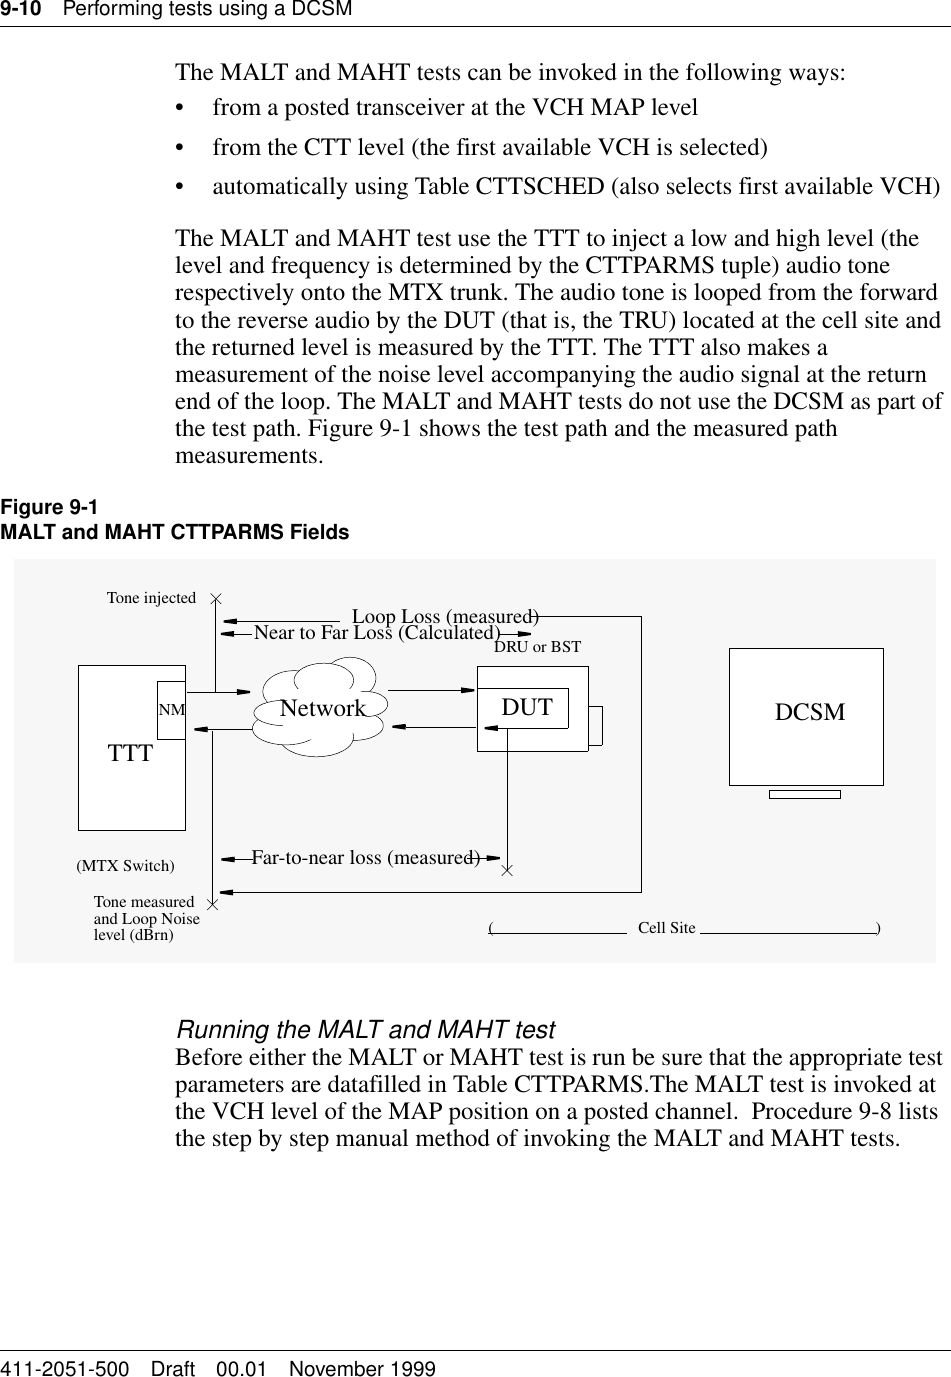 9-10 Performing tests using a DCSM411-2051-500 Draft 00.01 November 1999The MALT and MAHT tests can be invoked in the following ways:• from a posted transceiver at the VCH MAP level• from the CTT level (the first available VCH is selected)• automatically using Table CTTSCHED (also selects first available VCH)The MALT and MAHT test use the TTT to inject a low and high level (the level and frequency is determined by the CTTPARMS tuple) audio tone respectively onto the MTX trunk. The audio tone is looped from the forward to the reverse audio by the DUT (that is, the TRU) located at the cell site and the returned level is measured by the TTT. The TTT also makes a measurement of the noise level accompanying the audio signal at the return end of the loop. The MALT and MAHT tests do not use the DCSM as part of the test path. Figure 9-1 shows the test path and the measured path measurements.Figure 9-1MALT and MAHT CTTPARMS FieldsRunning the MALT and MAHT testBefore either the MALT or MAHT test is run be sure that the appropriate test parameters are datafilled in Table CTTPARMS.The MALT test is invoked at the VCH level of the MAP position on a posted channel.  Procedure 9-8 lists the step by step manual method of invoking the MALT and MAHT tests.DCSMDUTTTTLoop Loss (measured)NM NetworkDRU or BSTFar-to-near loss (measured)Tone injectedTone measuredand Loop Noiselevel (dBrn)(MTX Switch)Cell Site()Near to Far Loss (Calculated)